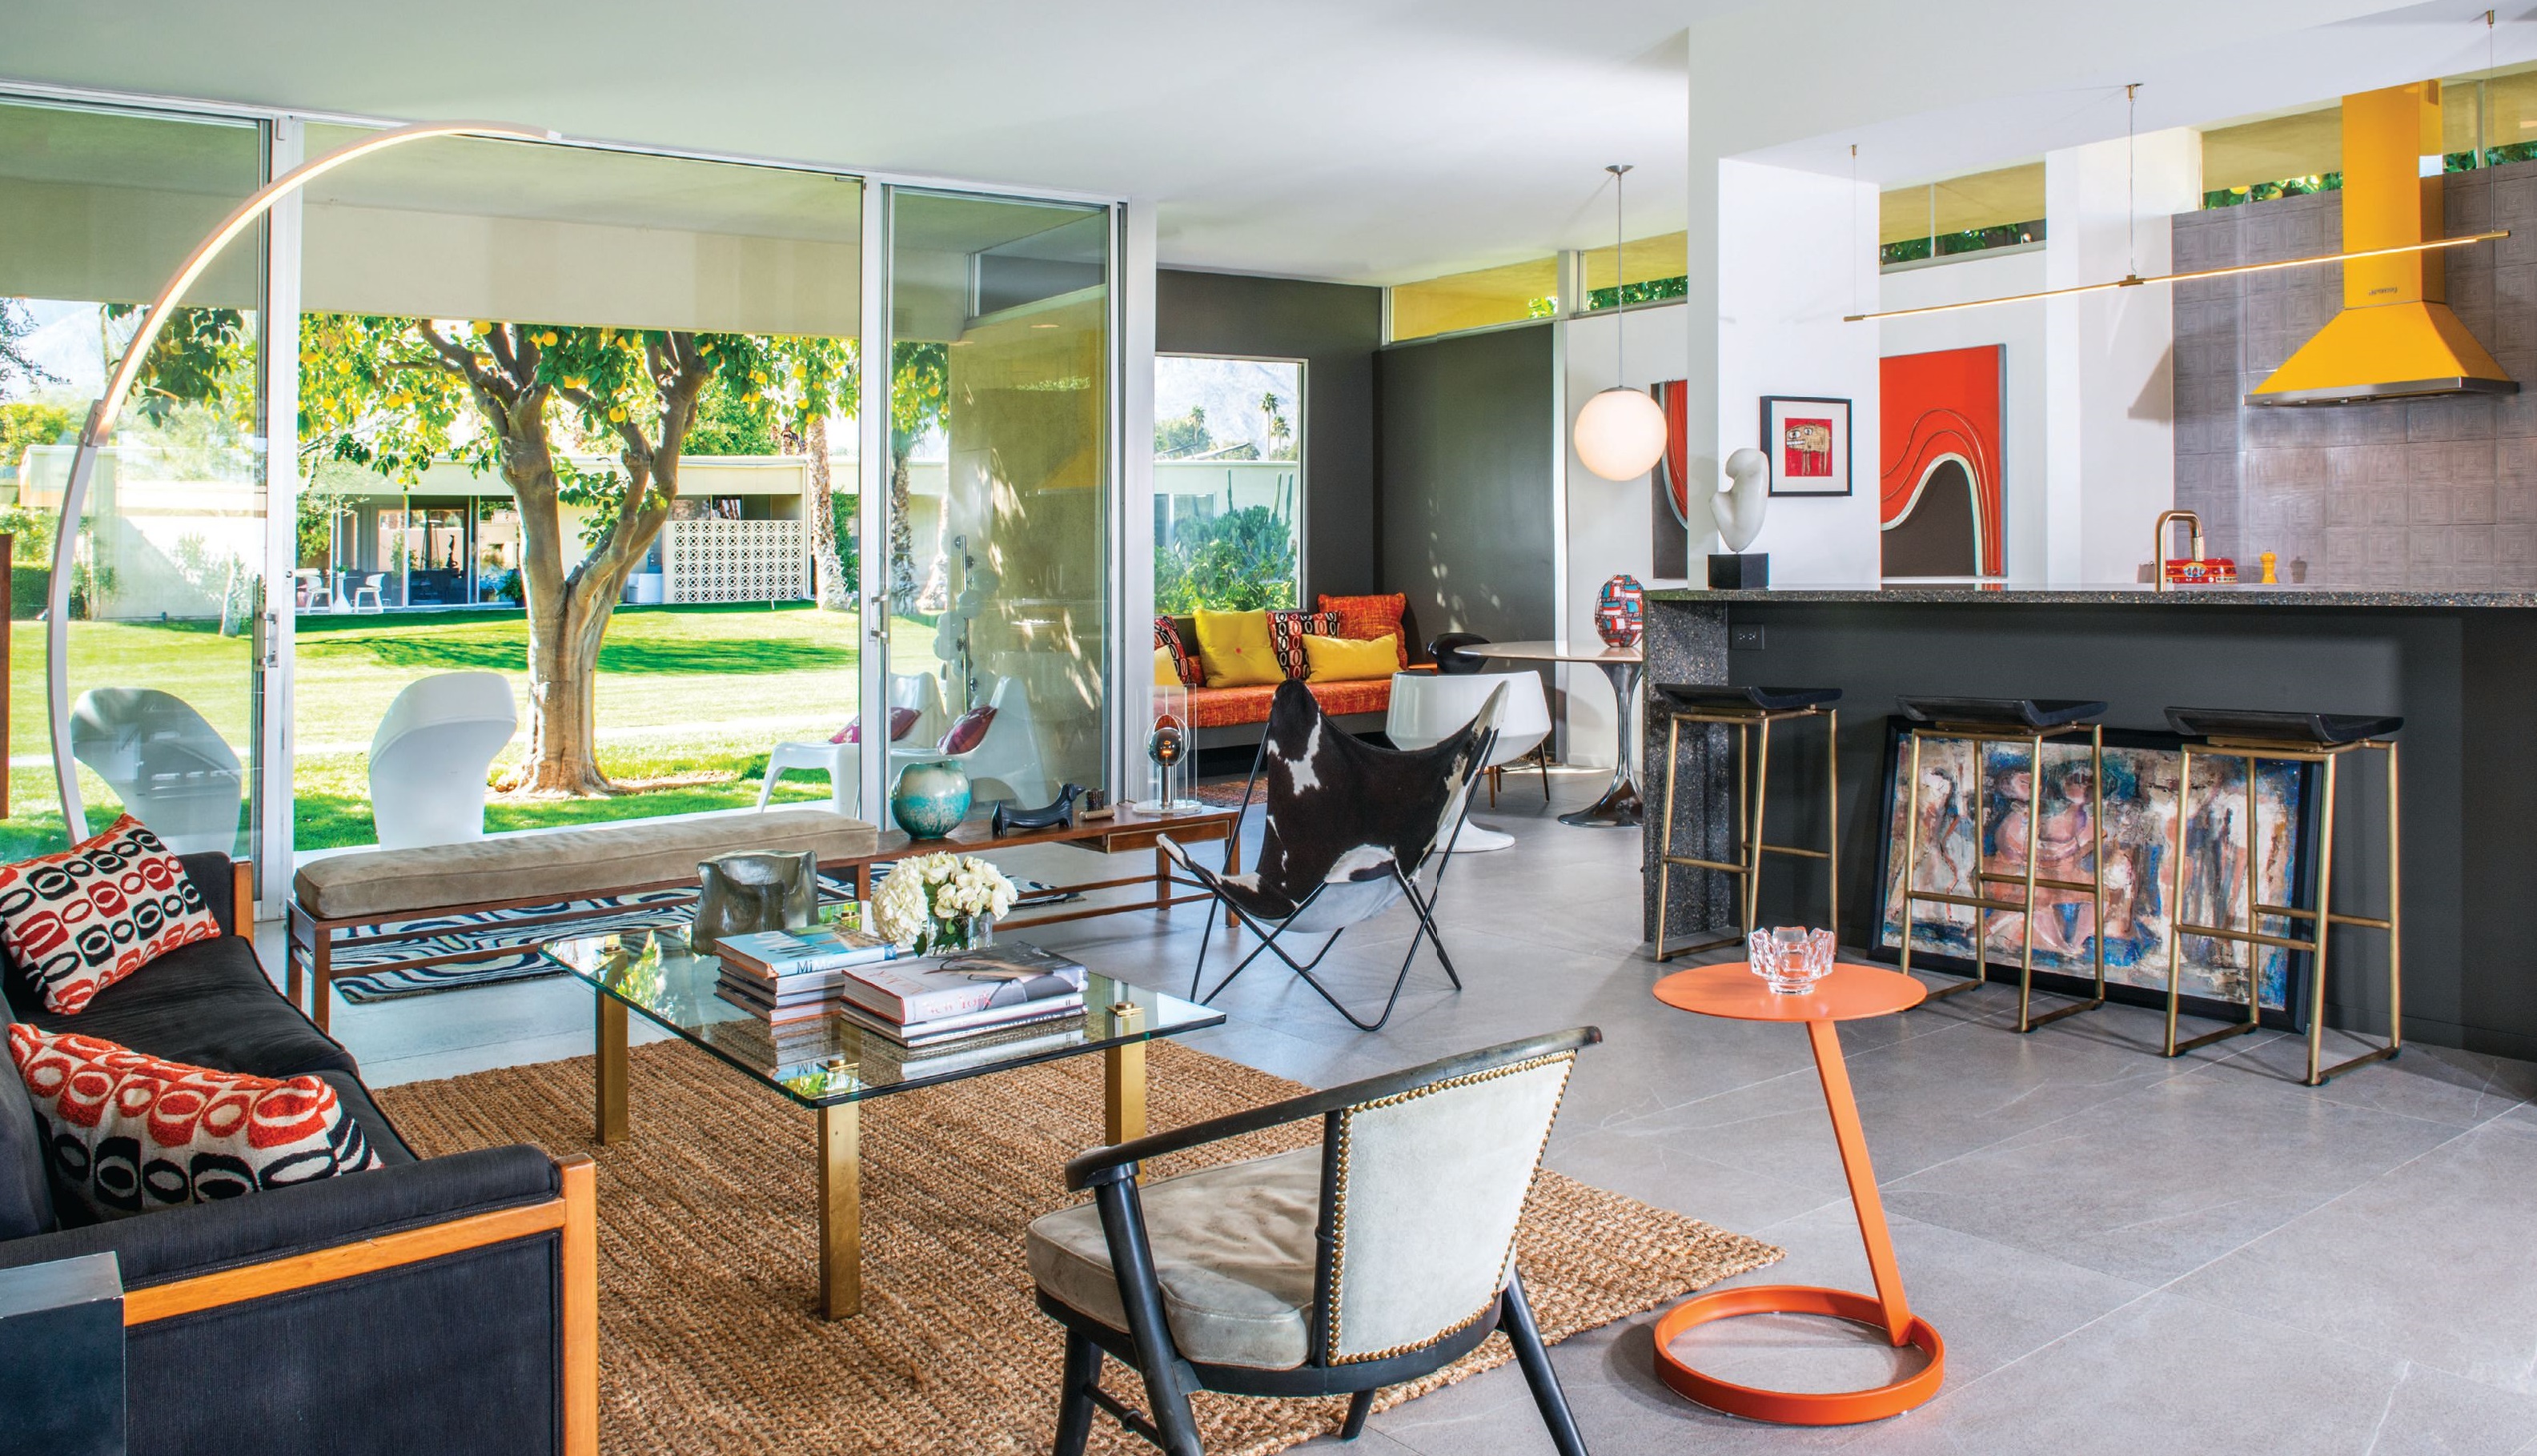 David Dunn’s Palm Springs condo is filled with an eclectic mix of vintage items, including many pieces he grew up with. PHOTOGRAPHED BY DAN CHAVKIN